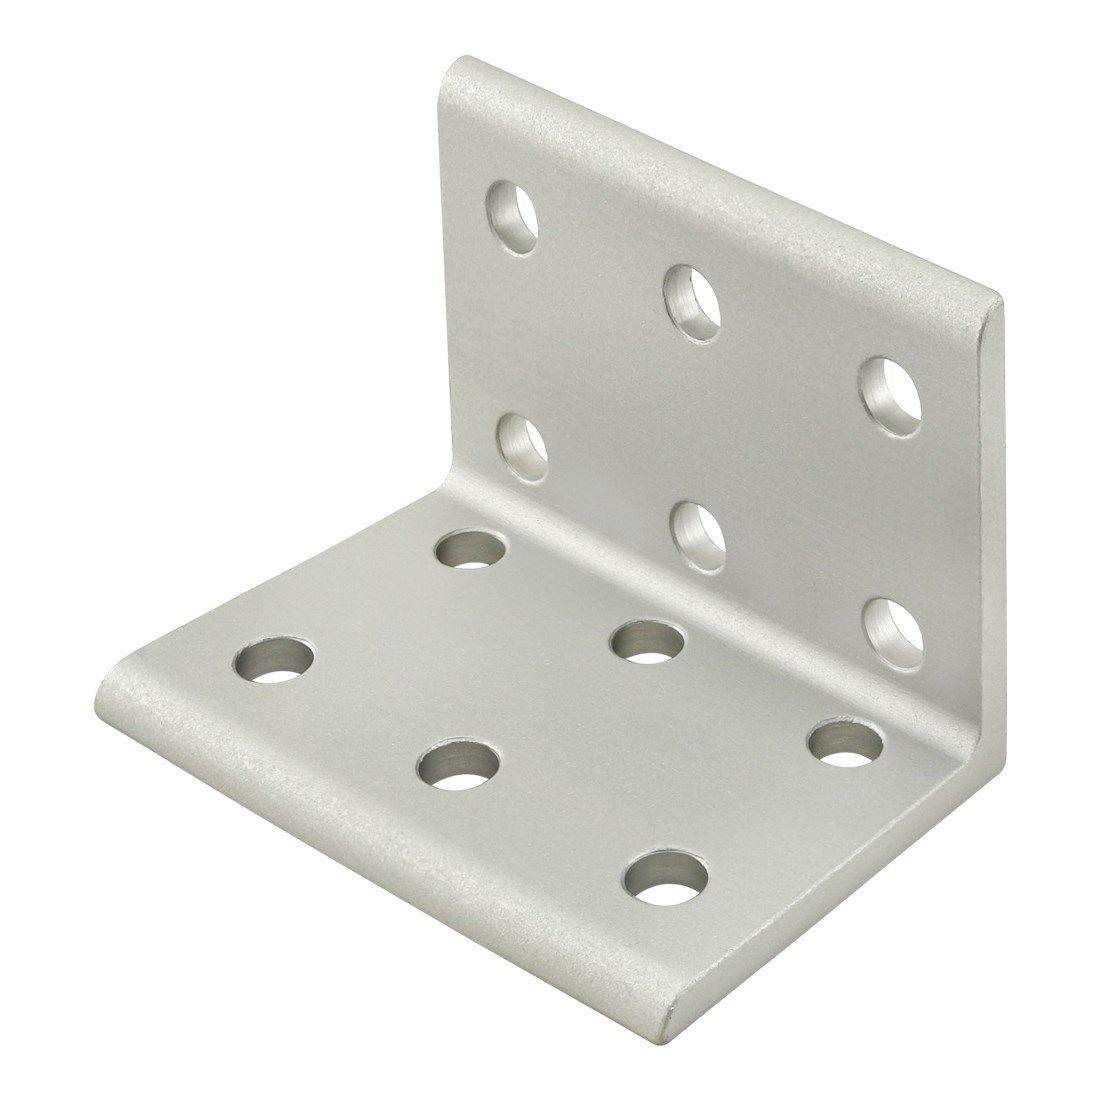 6090 Inside Corner Brackets 12 hole 30 series - Pack of 1 - Extrusion and CNC